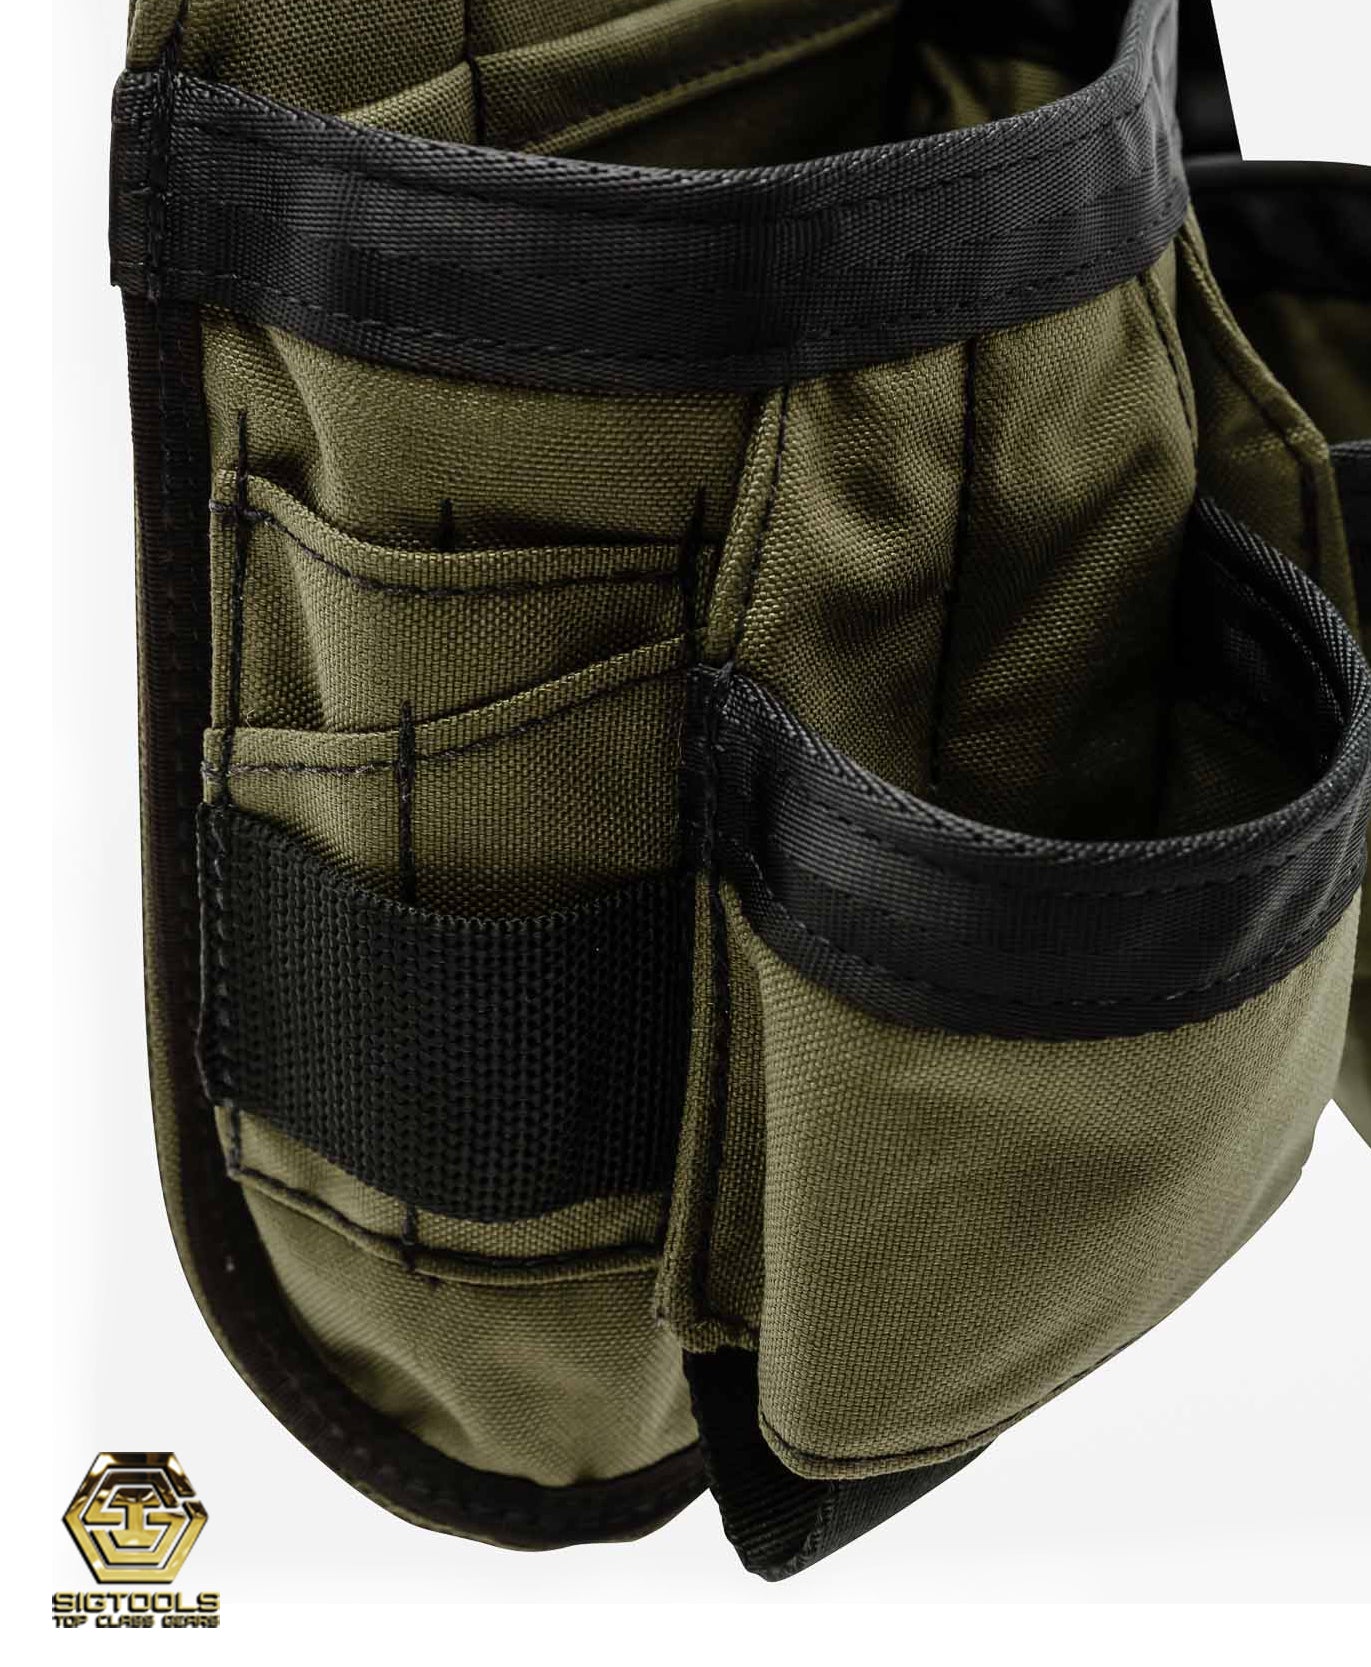 "Diamondback Axe Tool Pouch in Green - Left Hand Configuration - Side Detail View"